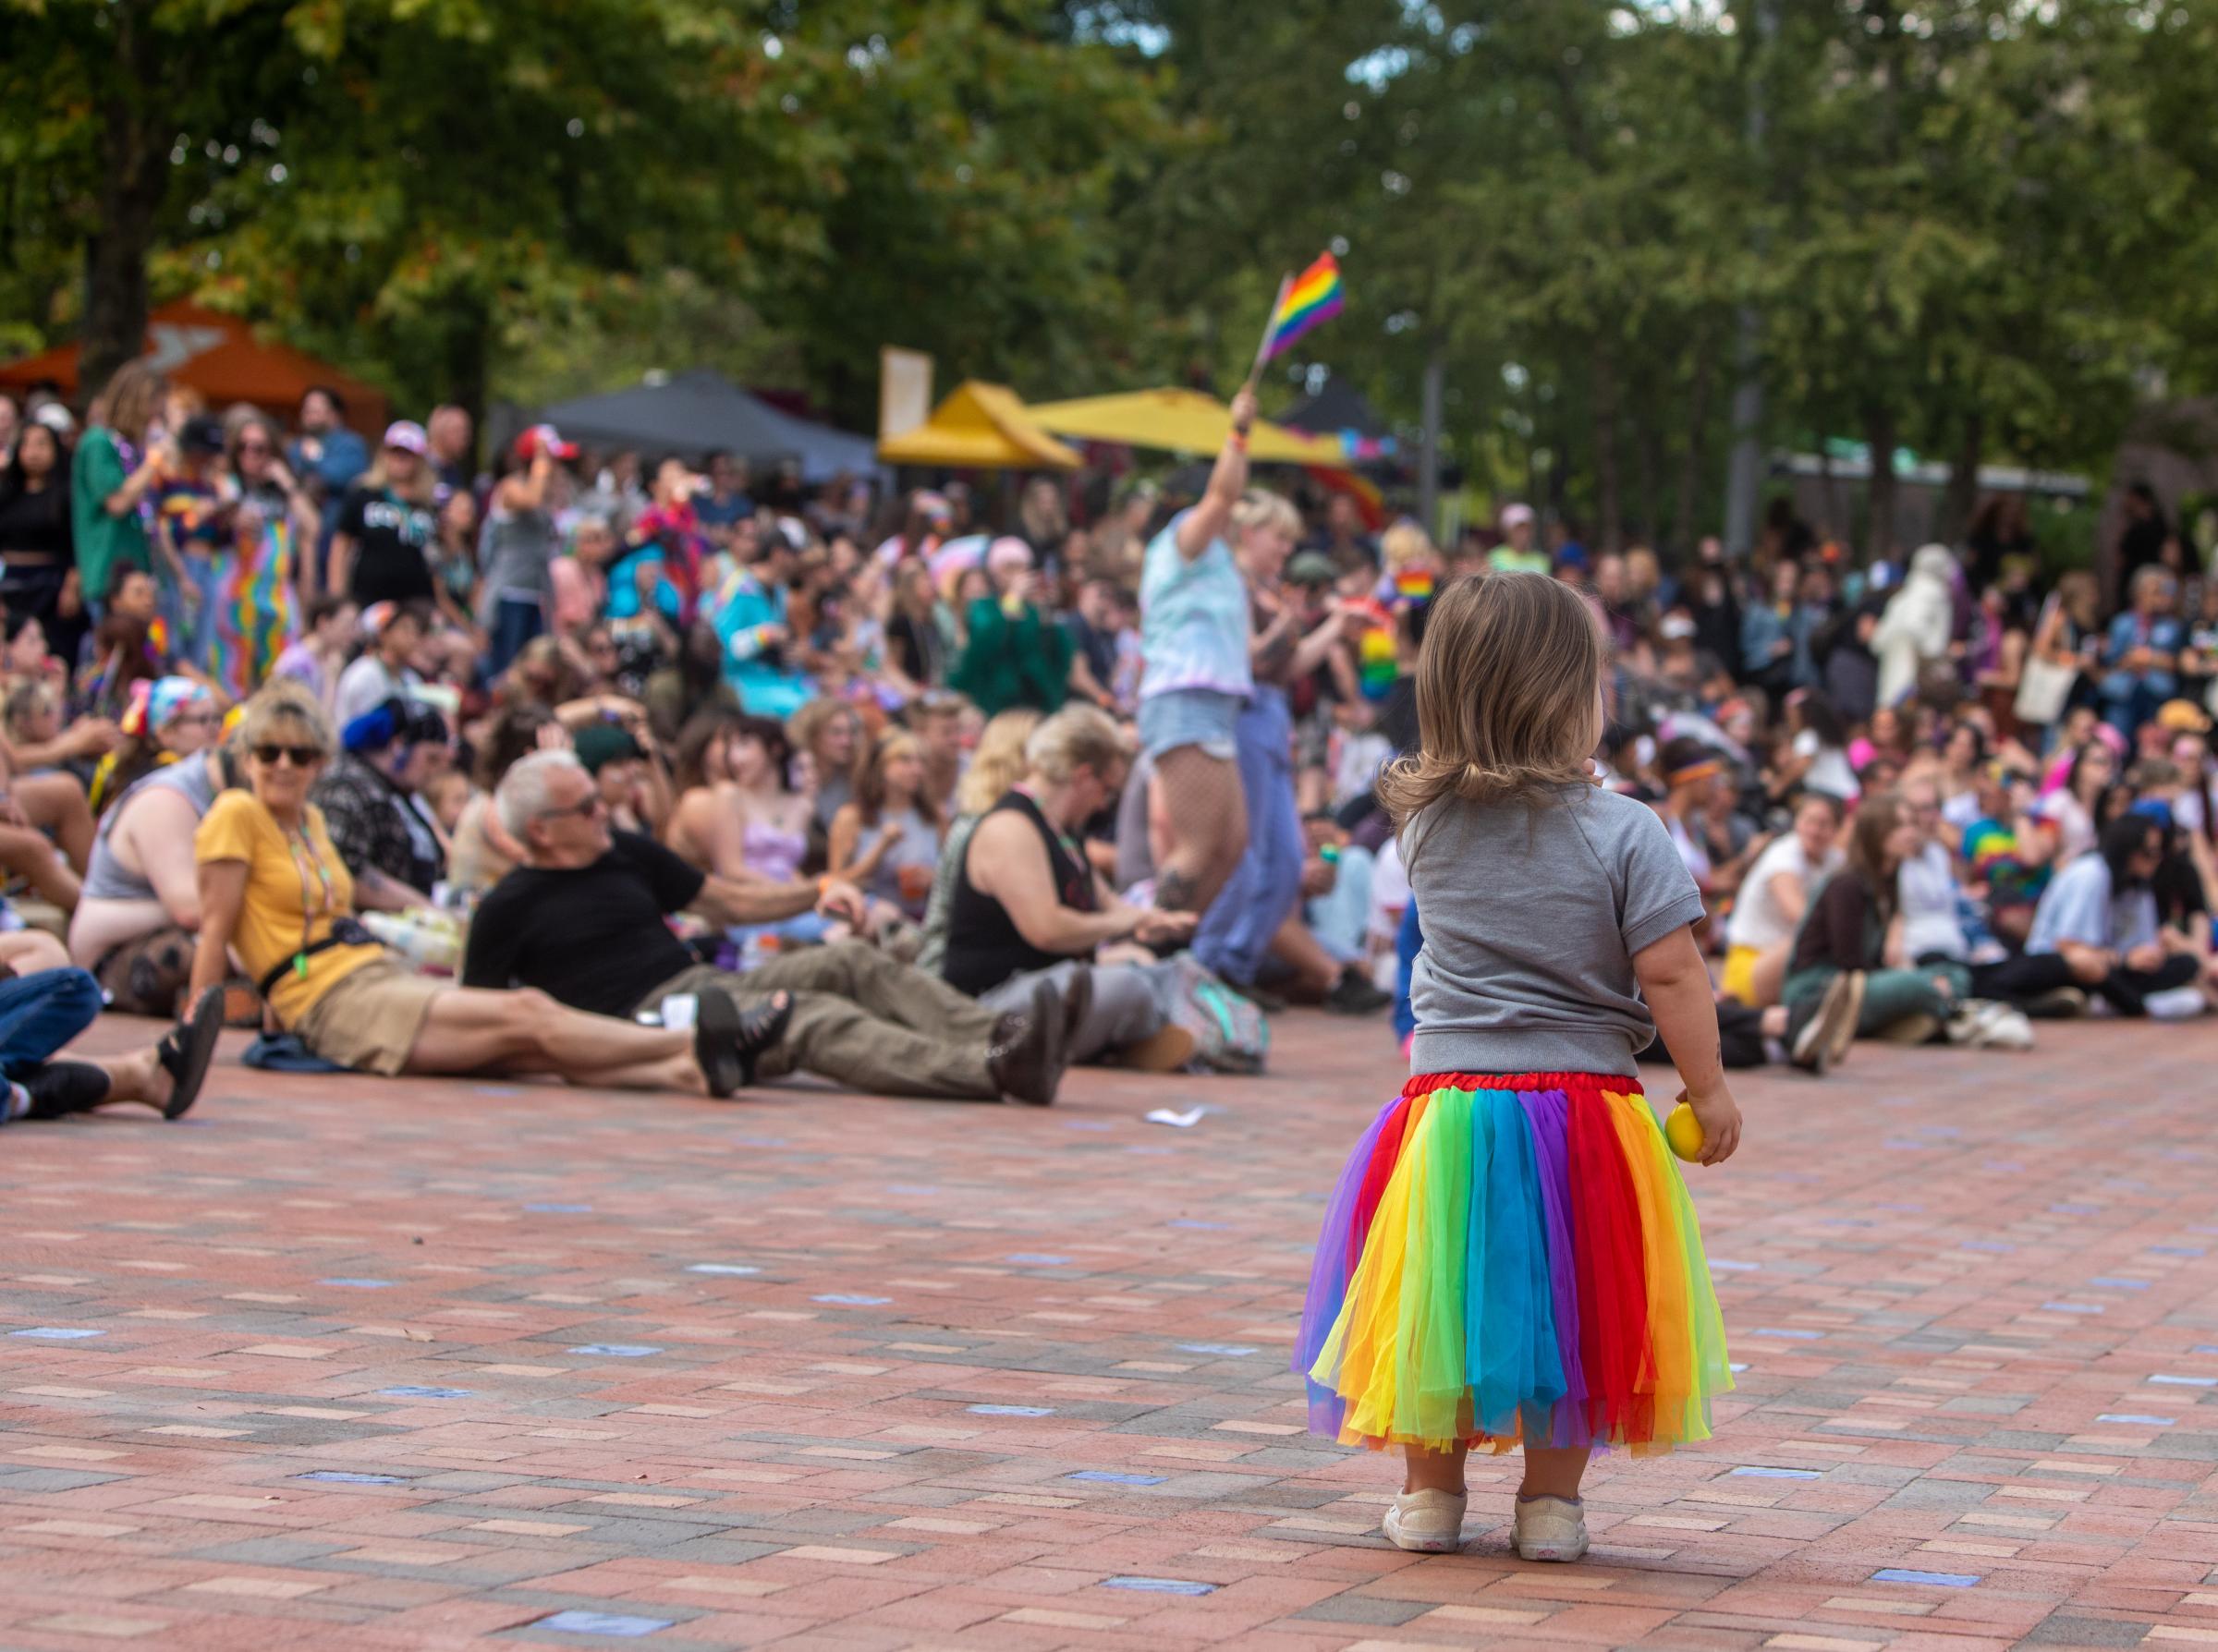 Blue Ridge Pride Festival 2022 - The event included LBGTQ families who gathered to promote equality, safety, and quality of life...